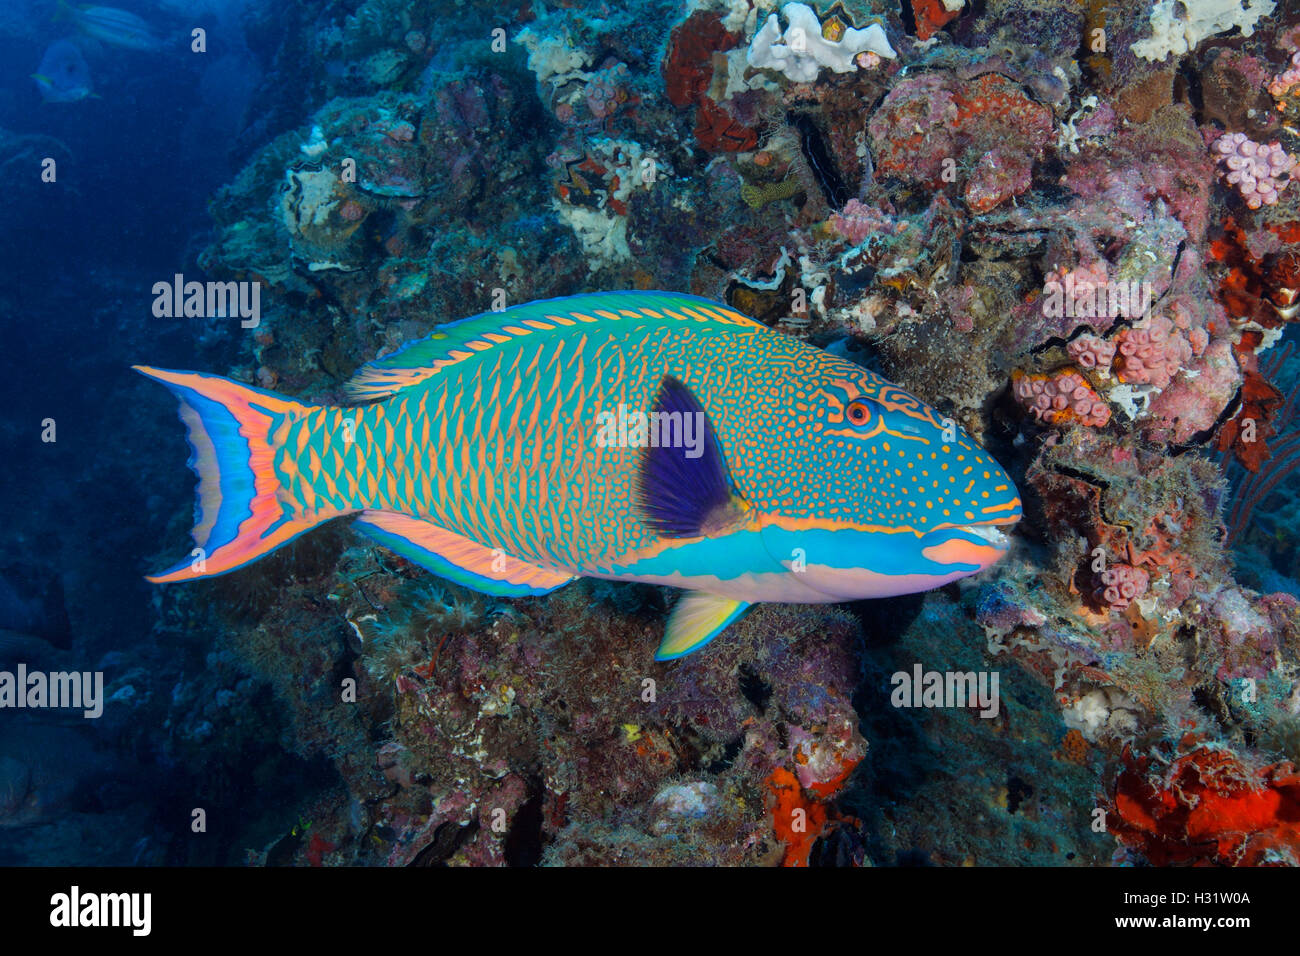 QZ40175-D. Spotted Parrotfish (Cetoscarus ocellatus), also called Bicolor Parrotfish, swimming among wreckage of the SS Yongala, Stock Photo